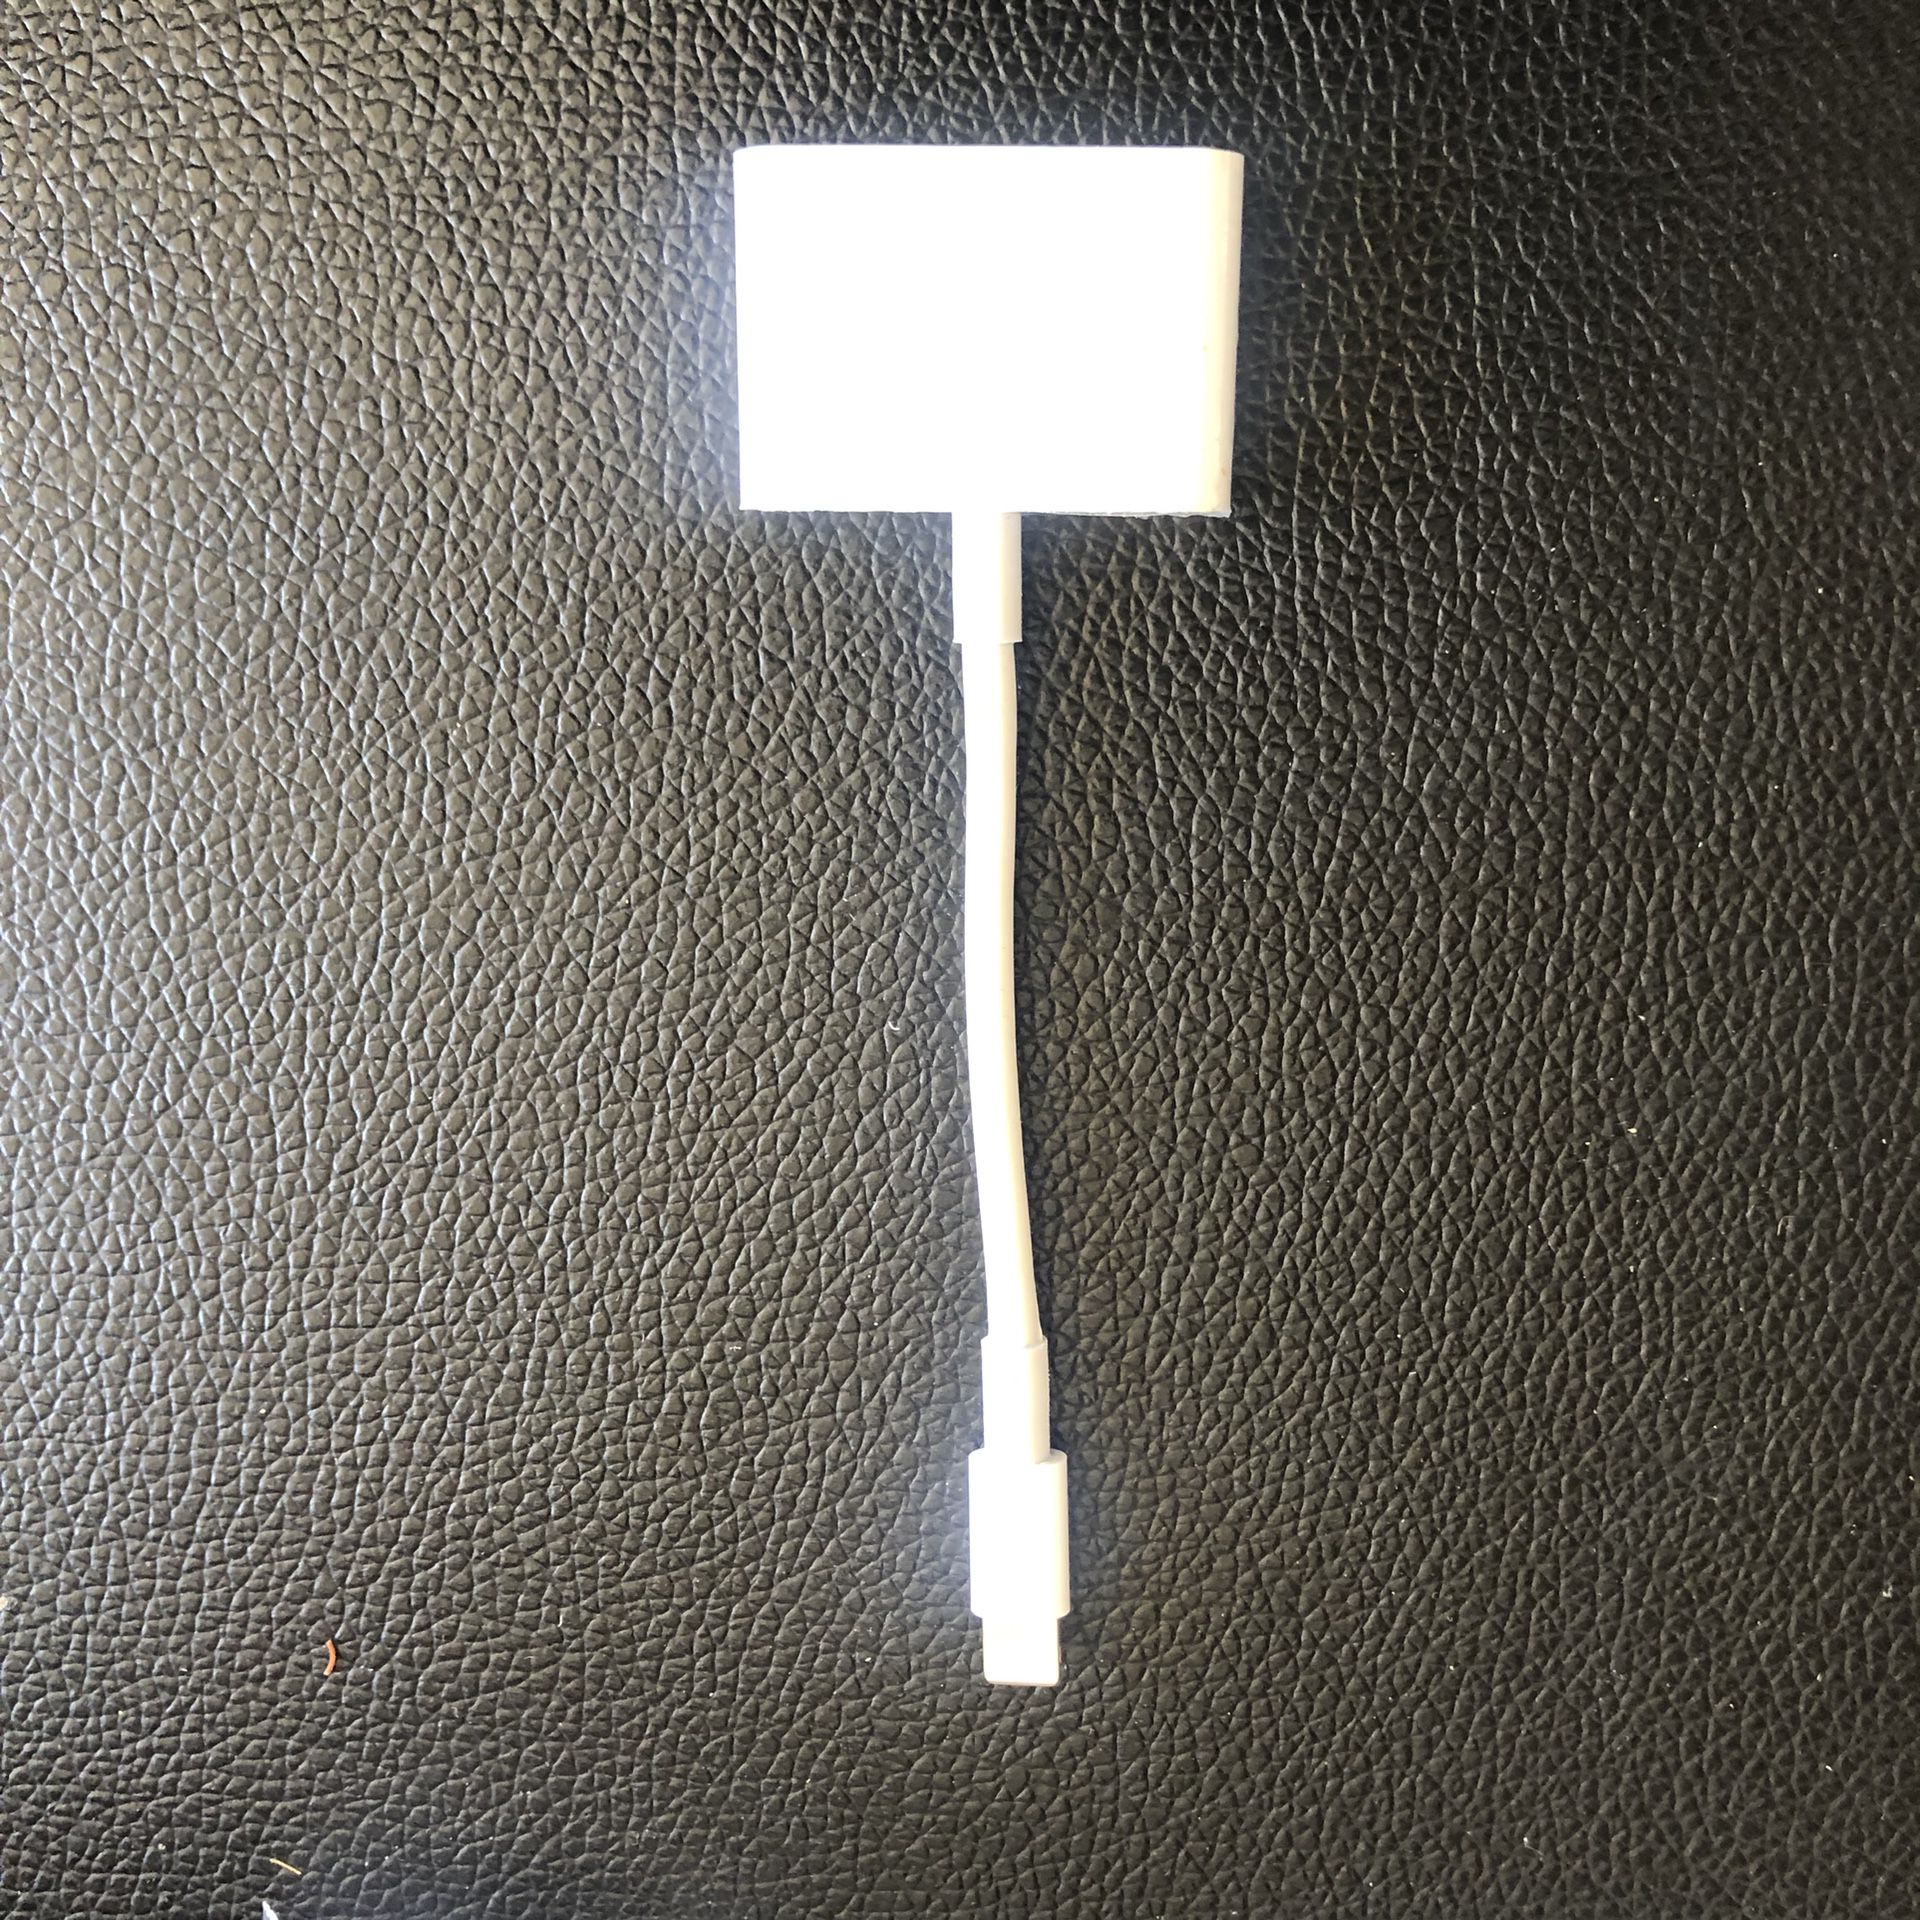 iPhone to hdmi